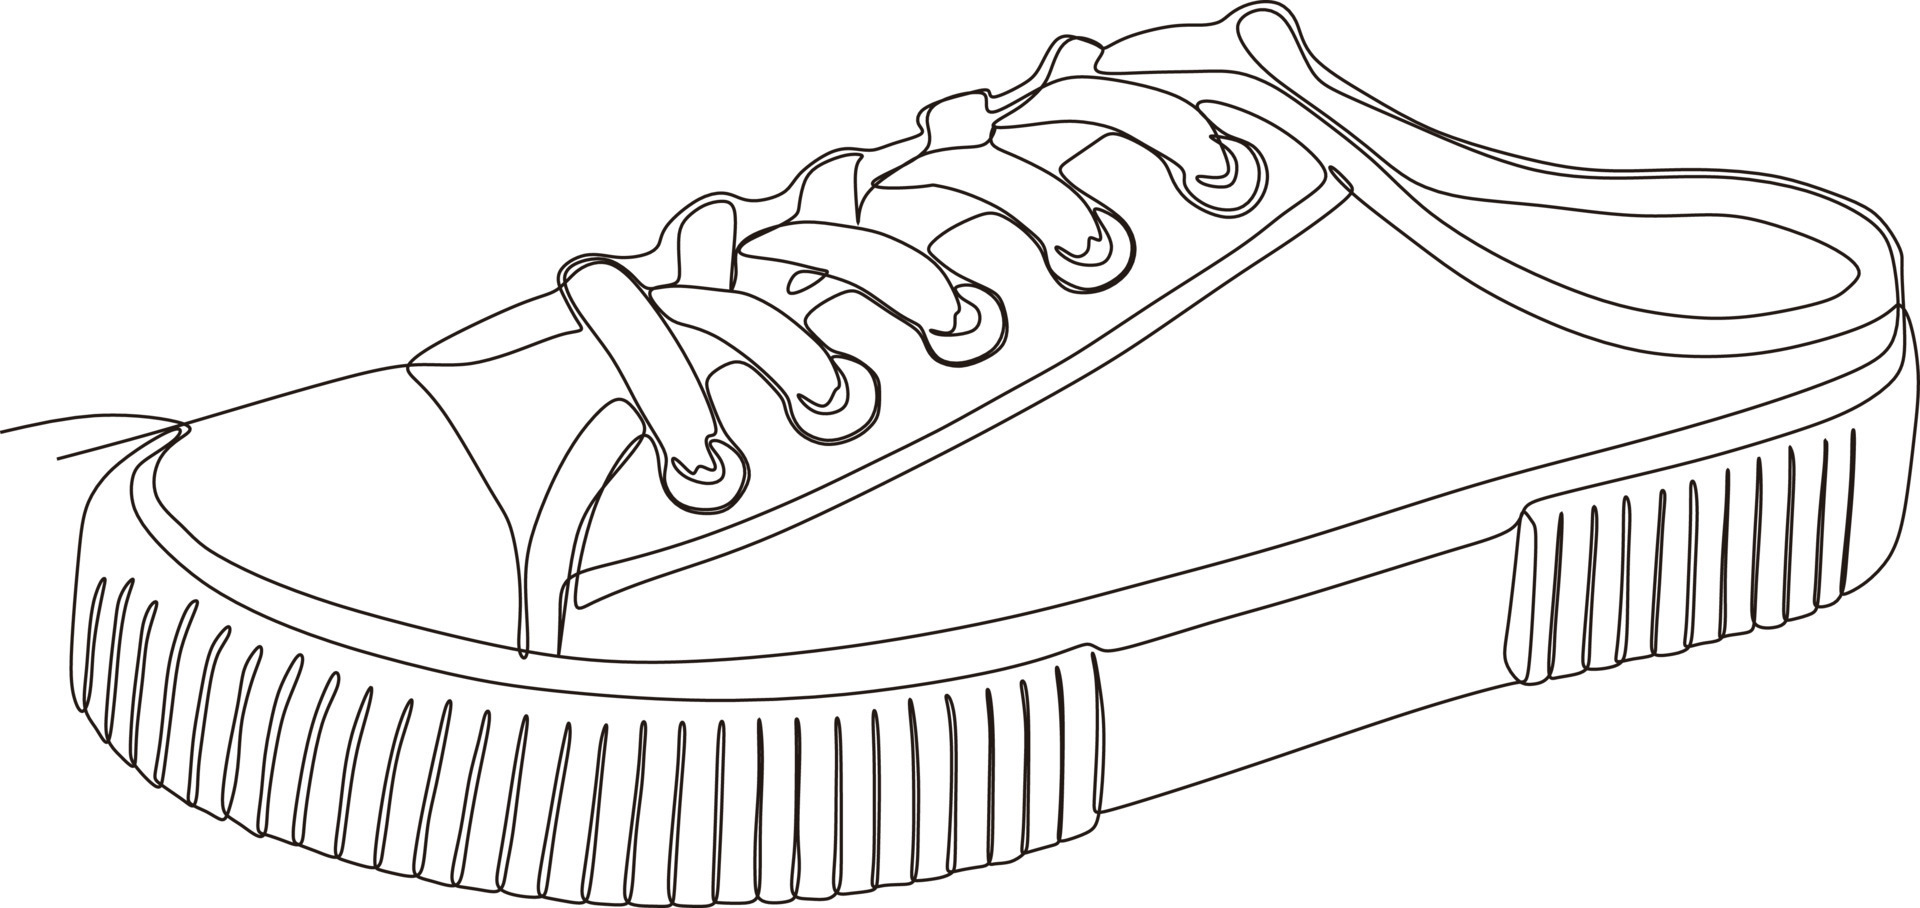 continuous line art drawing of shoes in black and white 16818749 Vector ...